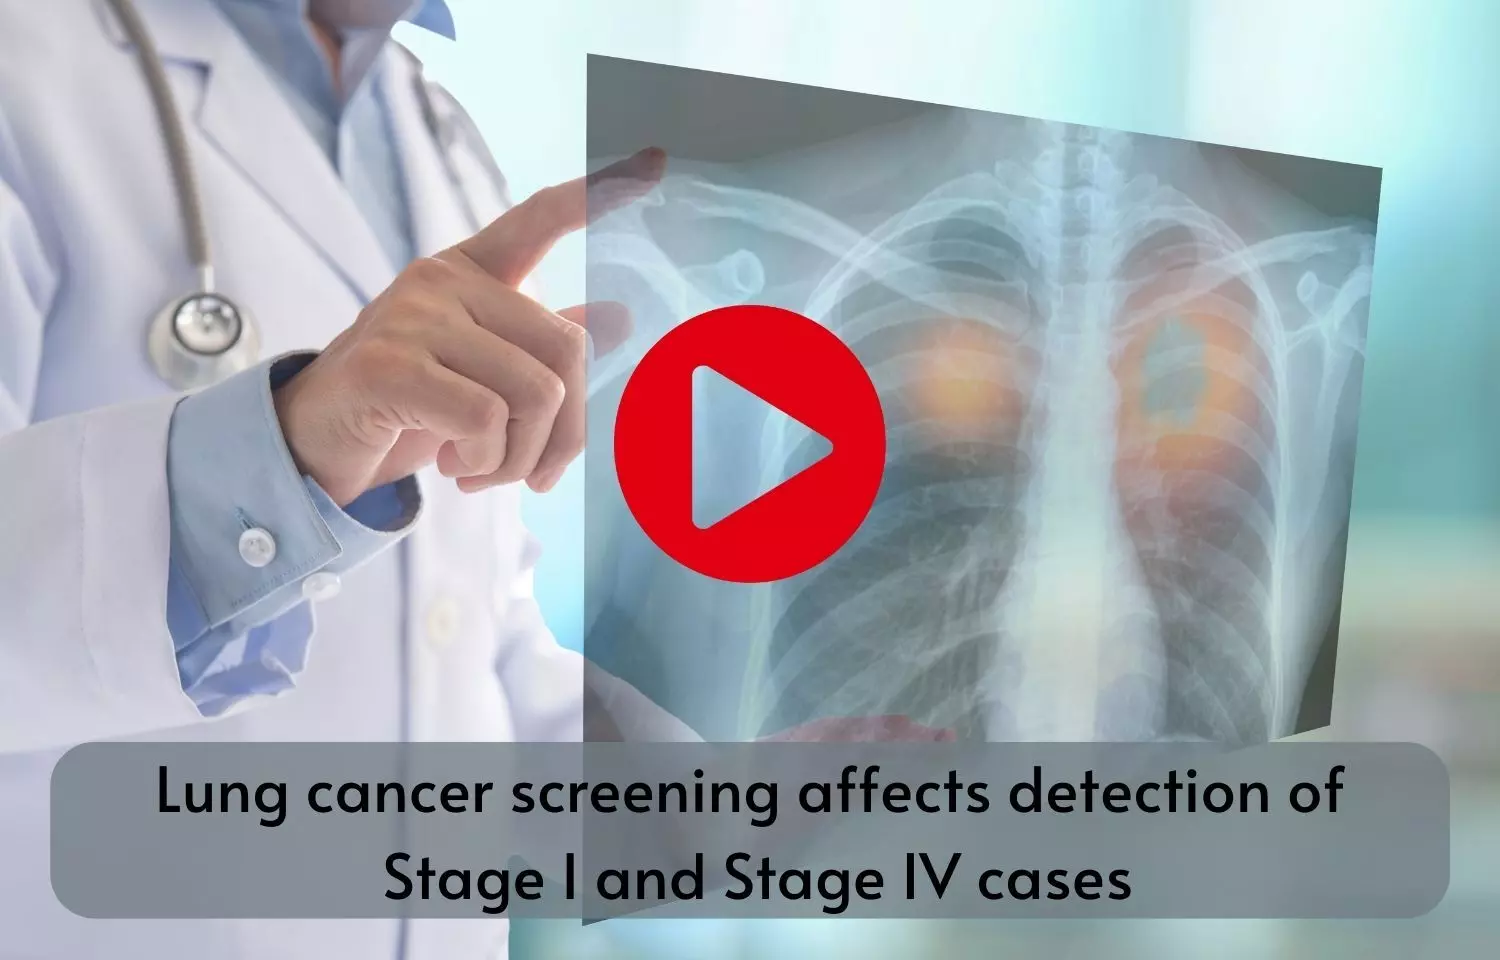 Lung cancer screening affects detection of Stage I and Stage IV cases